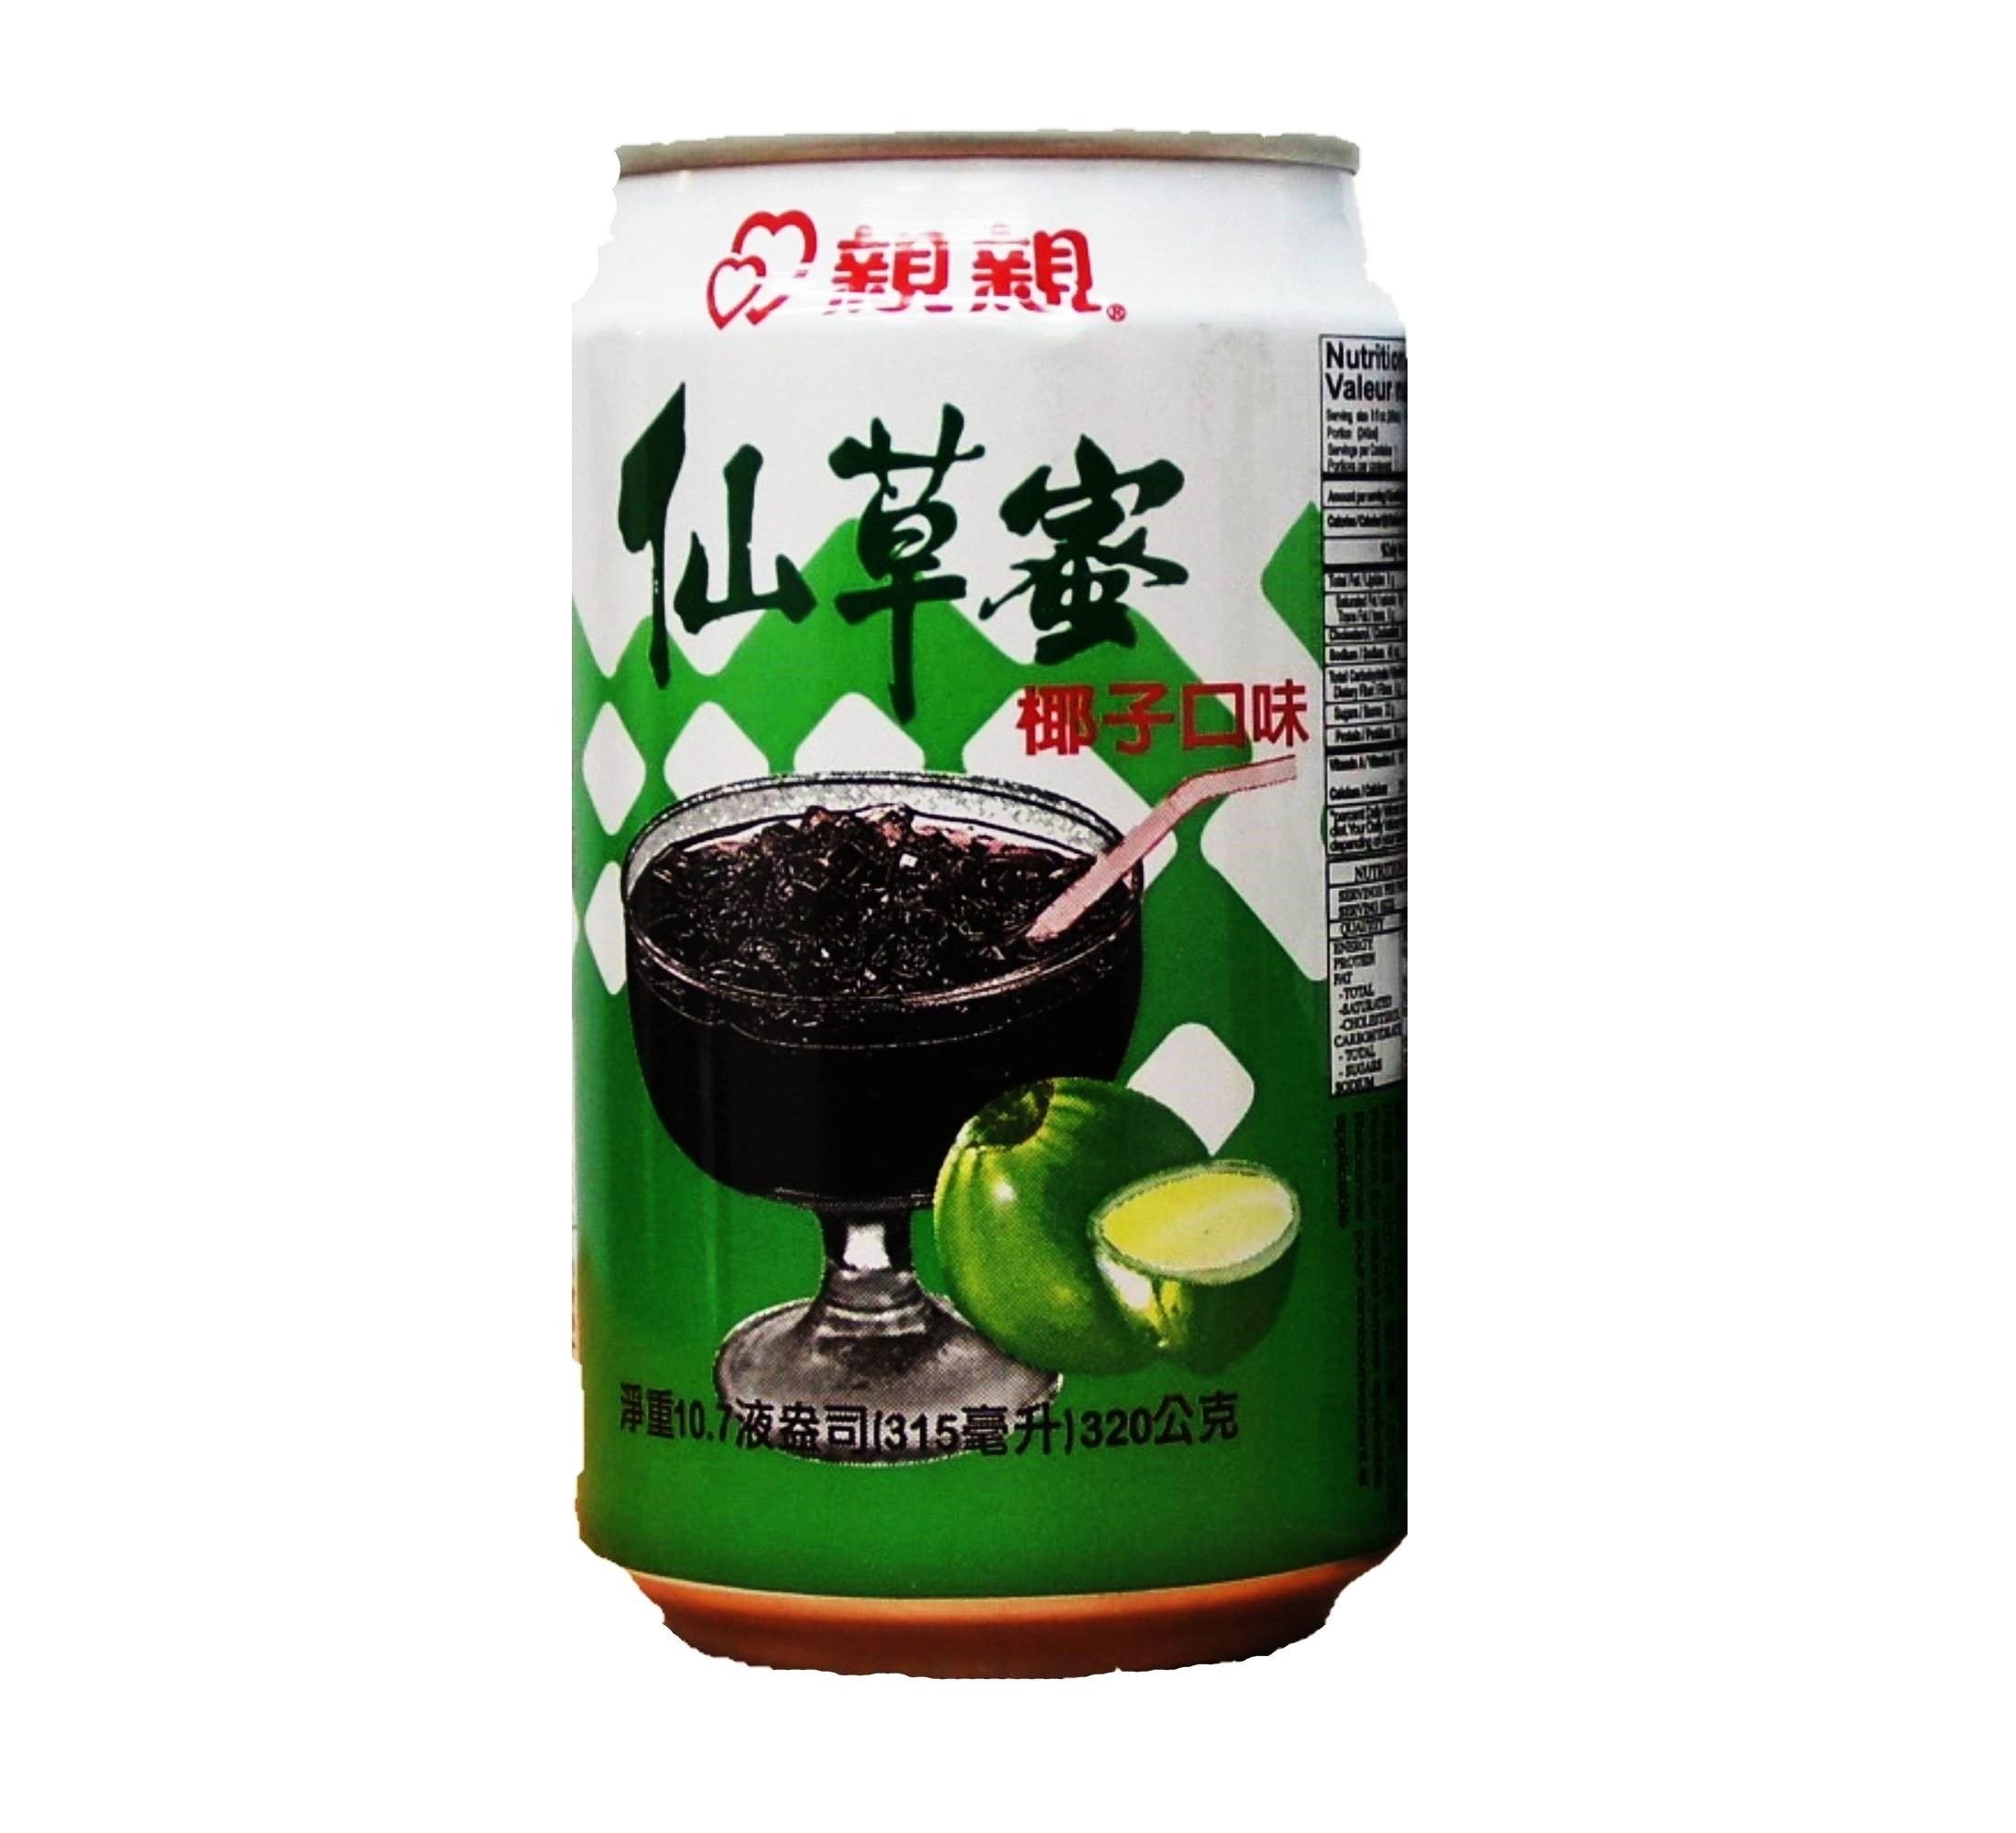 CHIN CHIN COCONUT GRASS JELLY DRINK DR110053